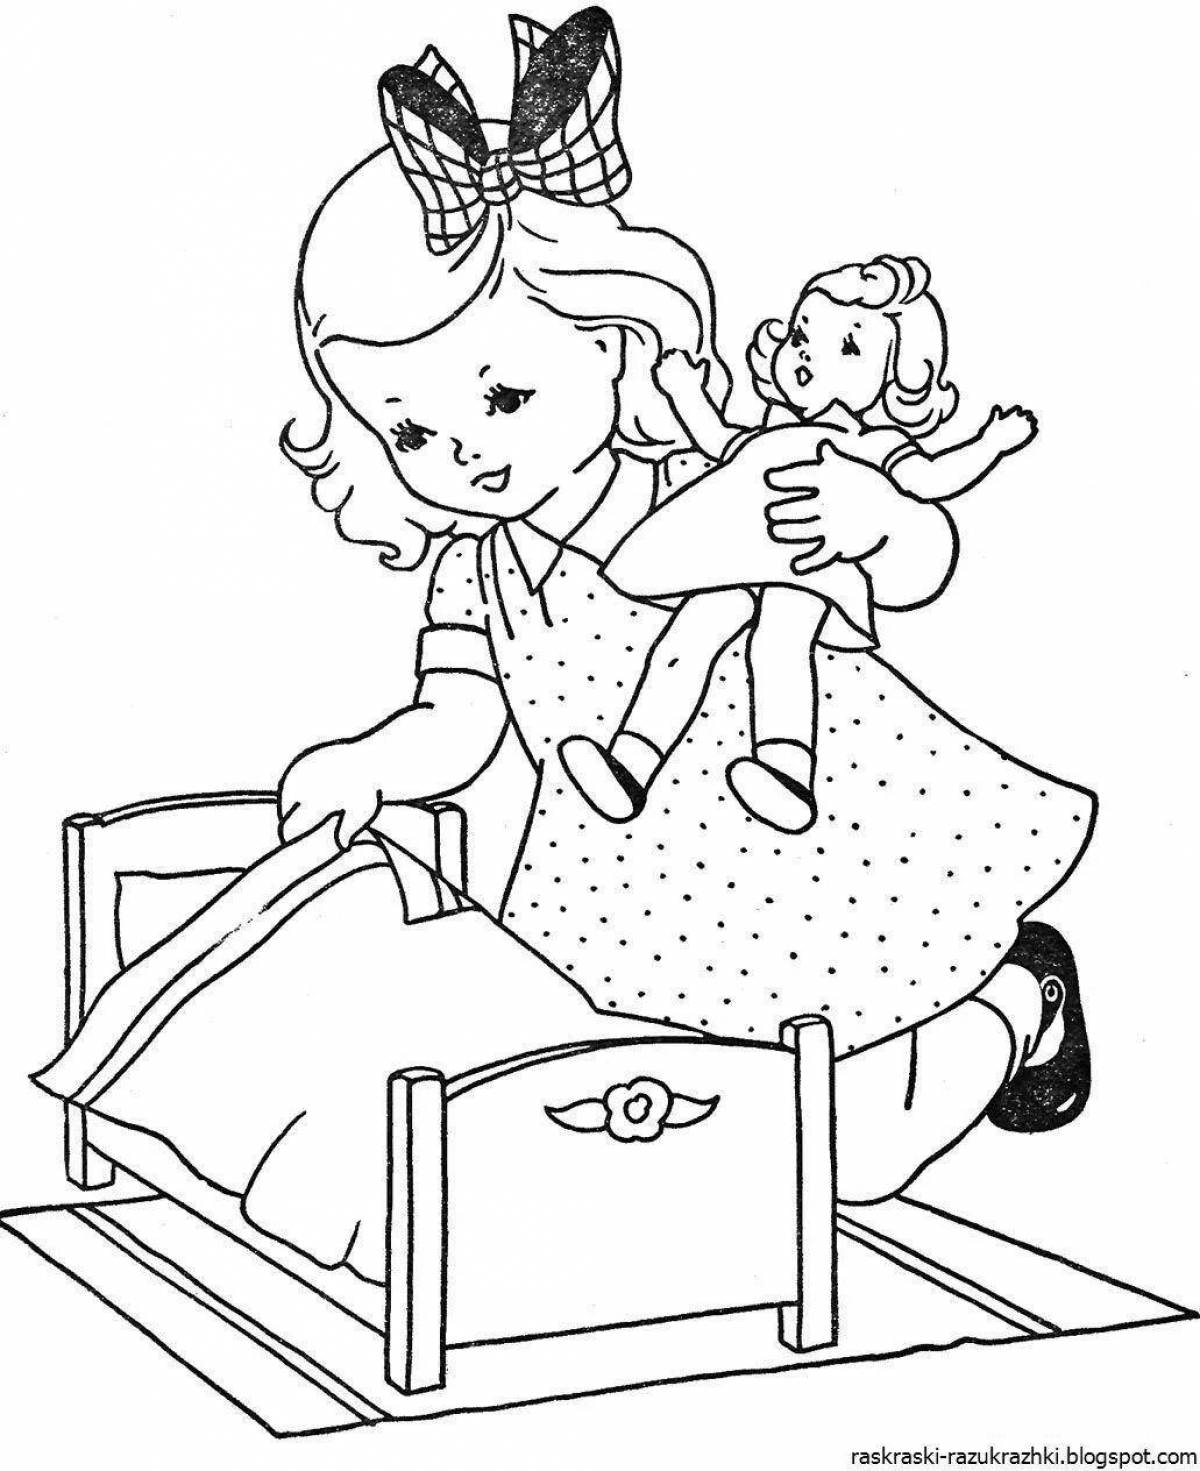 Coloring doll for children